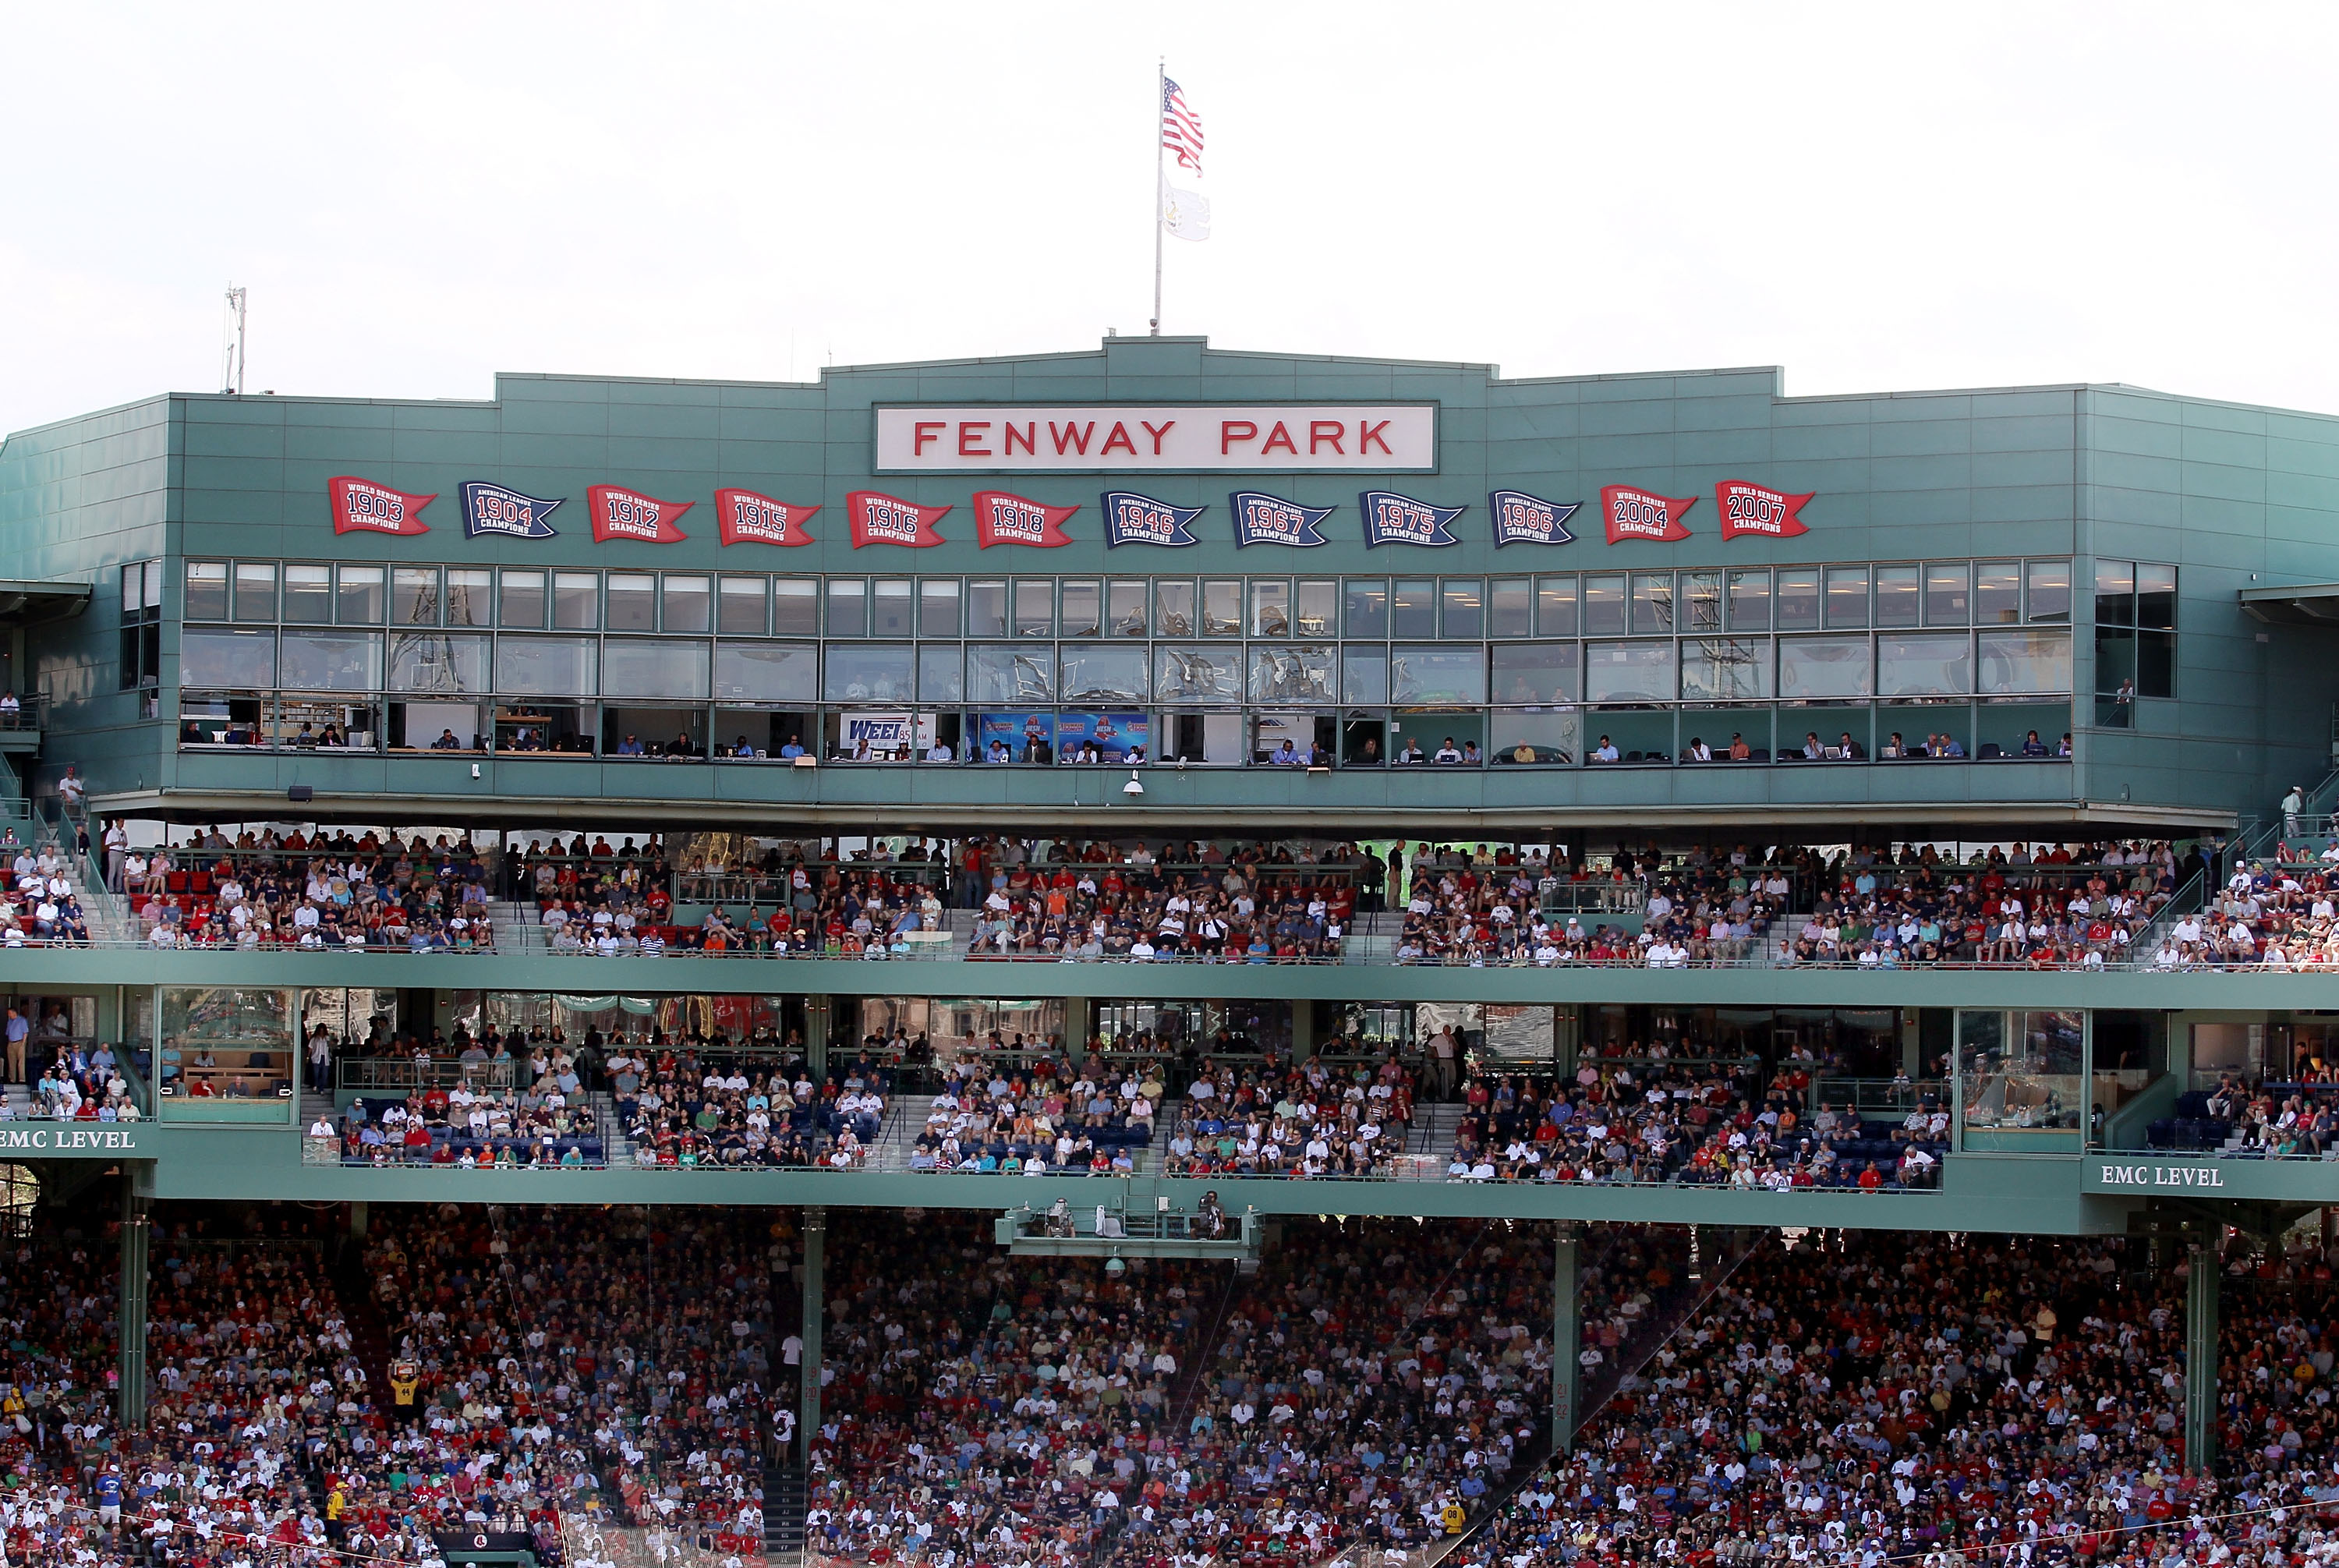 Fenway Park: Bullpen, Williamsburg was the name, invented b…